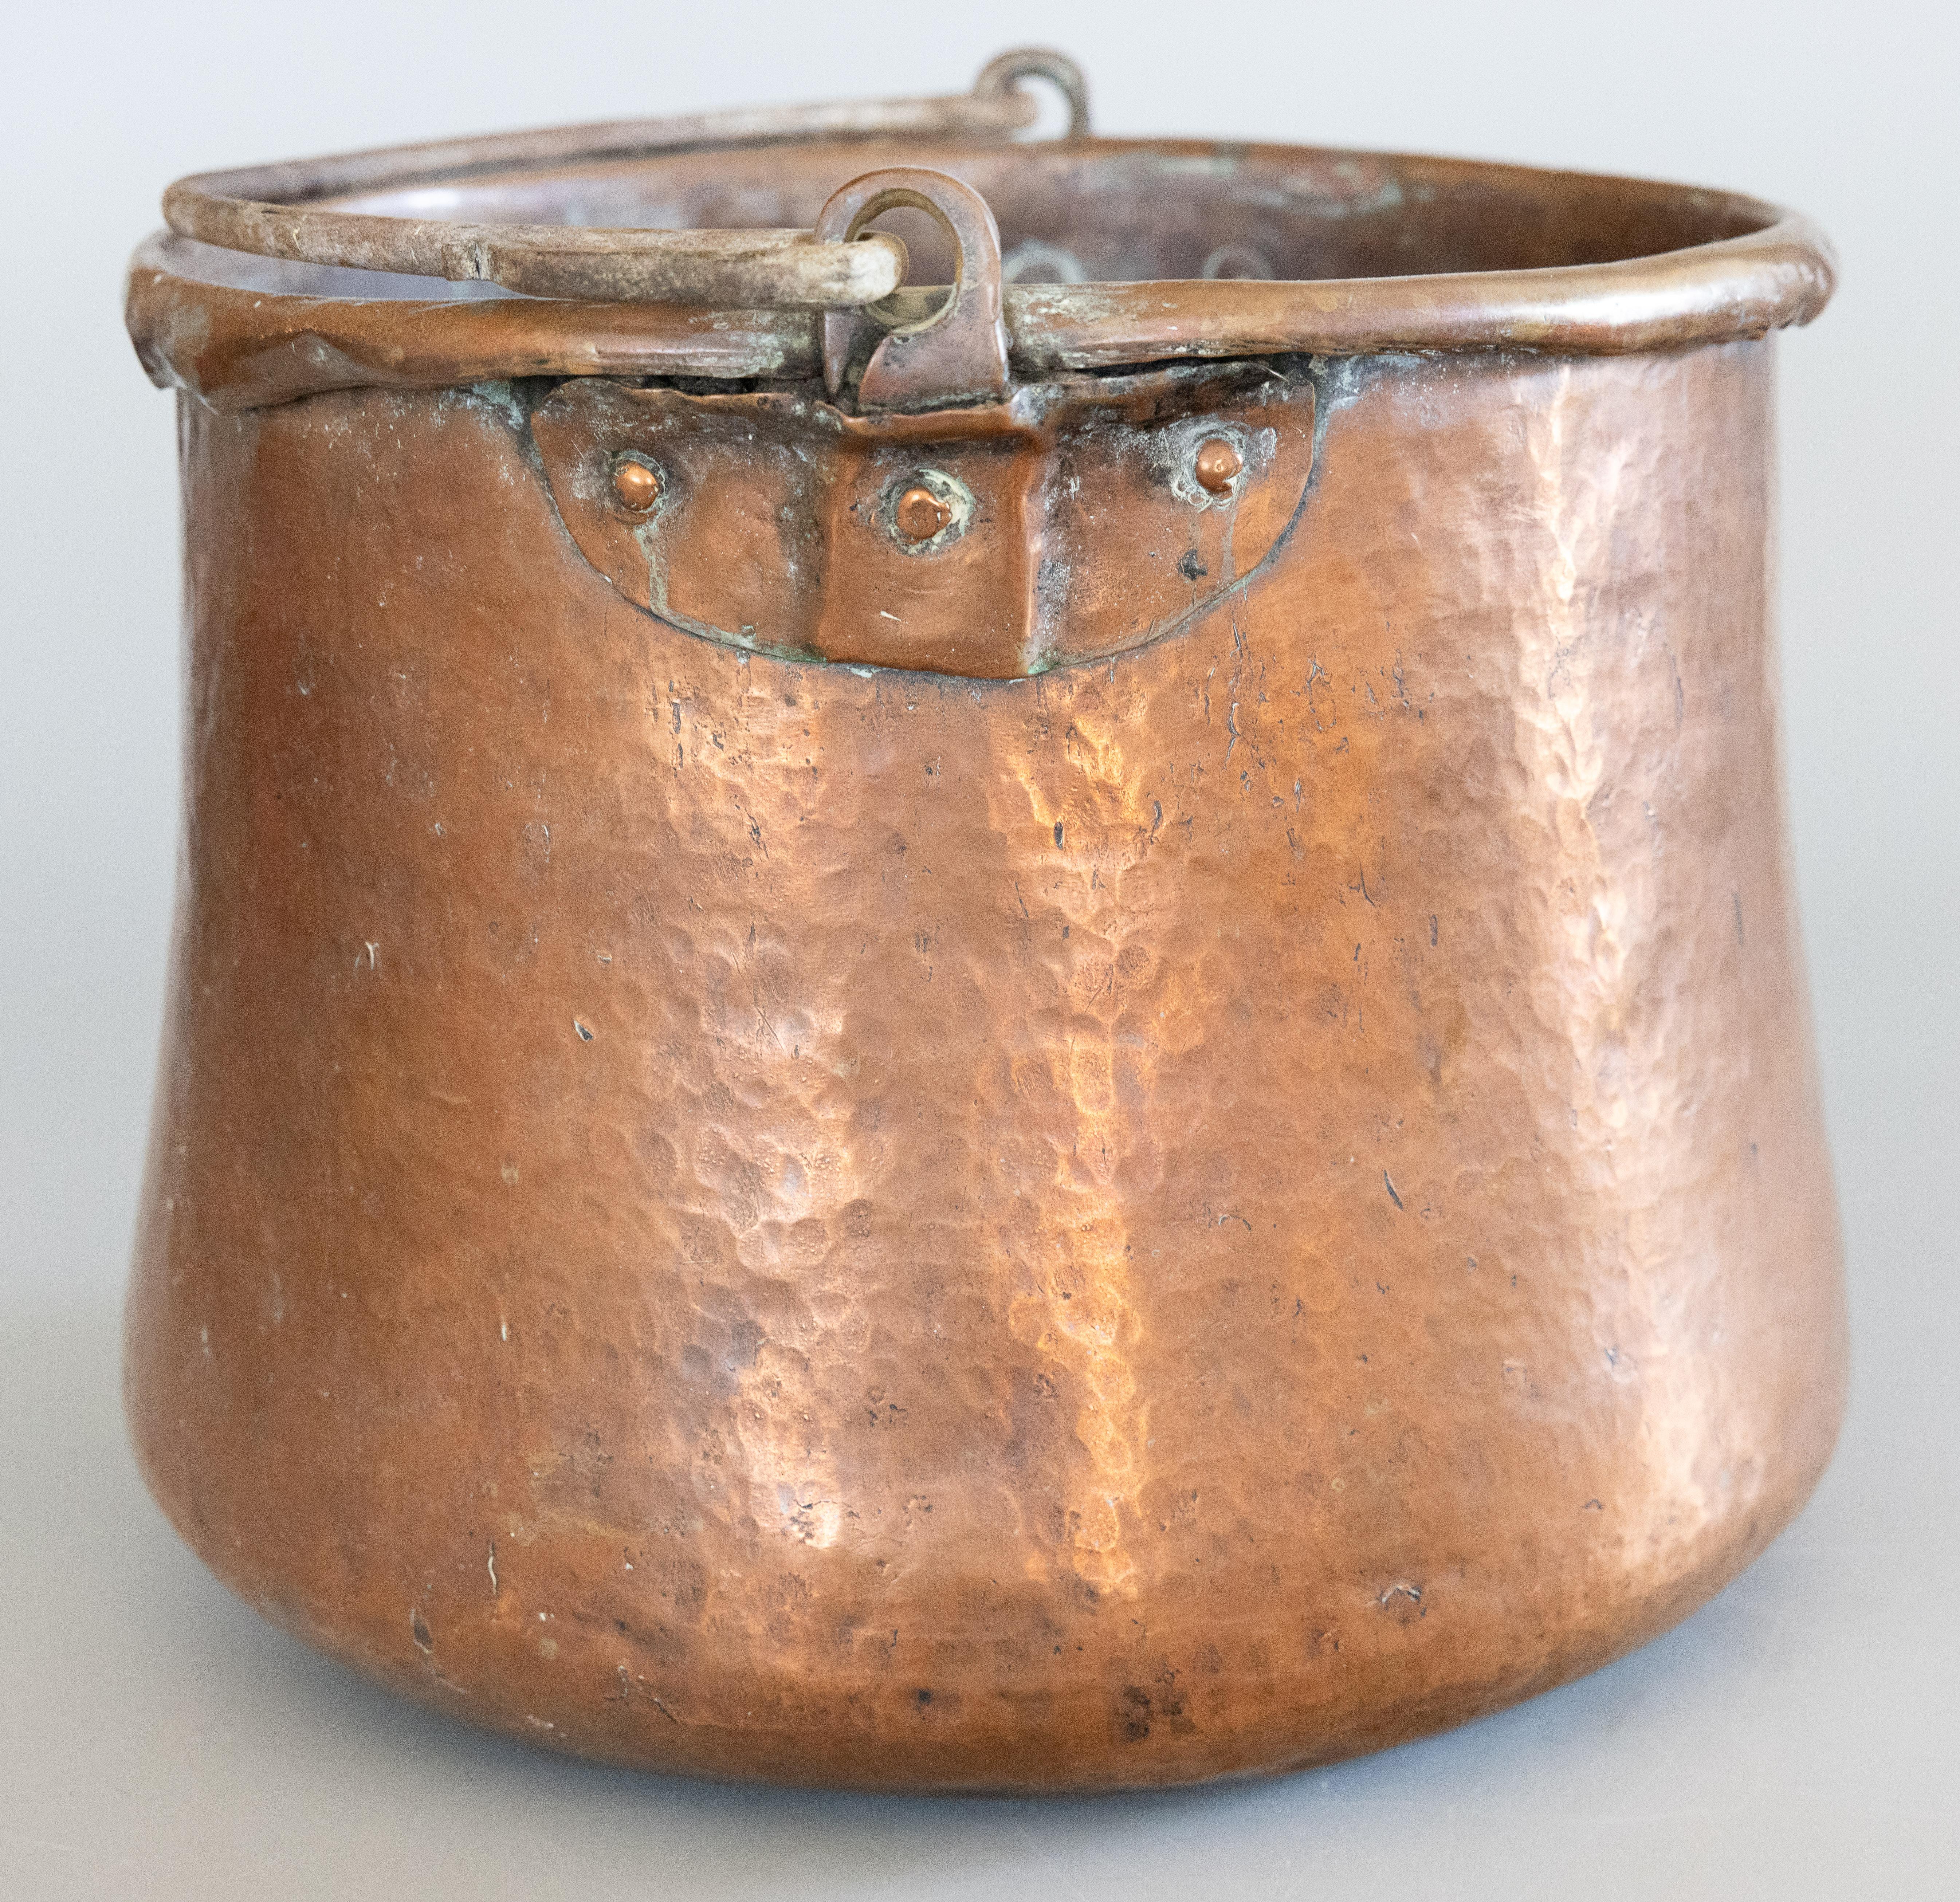 A lovely large antique 19th Century French hammered copper riveted cauldron pot with a charming forged iron swing handle. This is an authentic 19th Century hand hammered red copper pot from Normandy, France, solid and heavy, weighing over 11 lbs,